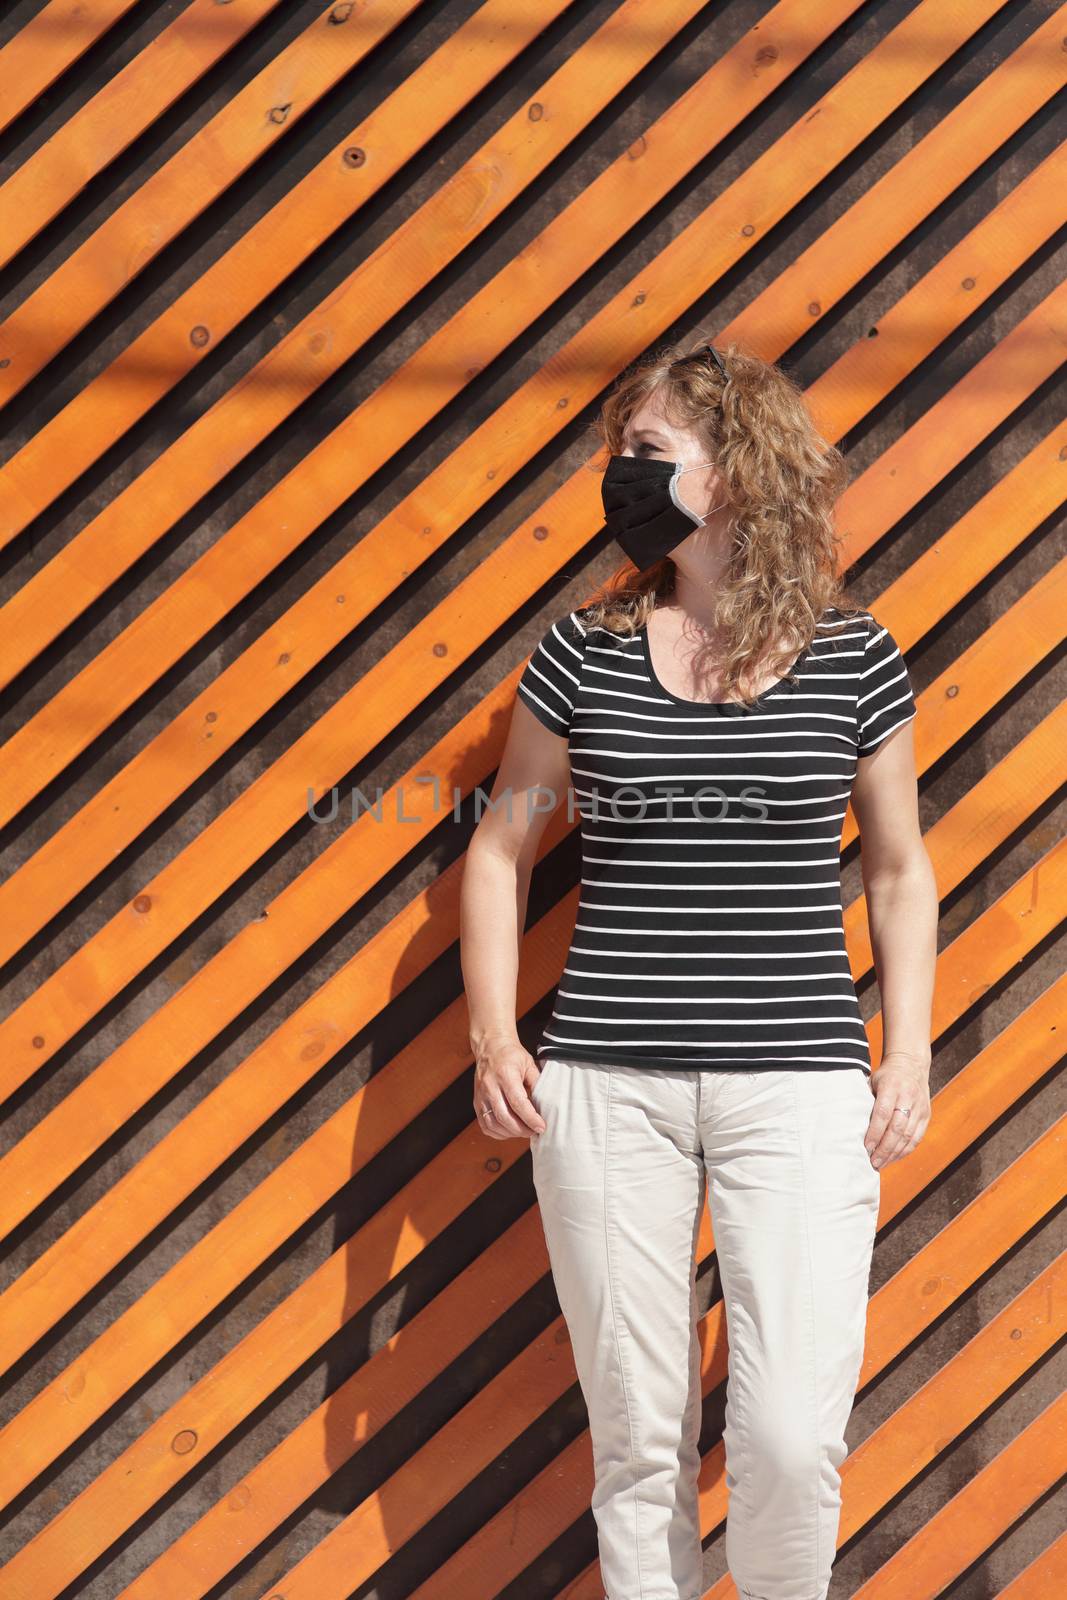 Portrait of a Girl in a protective mask free space for an inscription. Social distancing. Orange wooden wall in the background